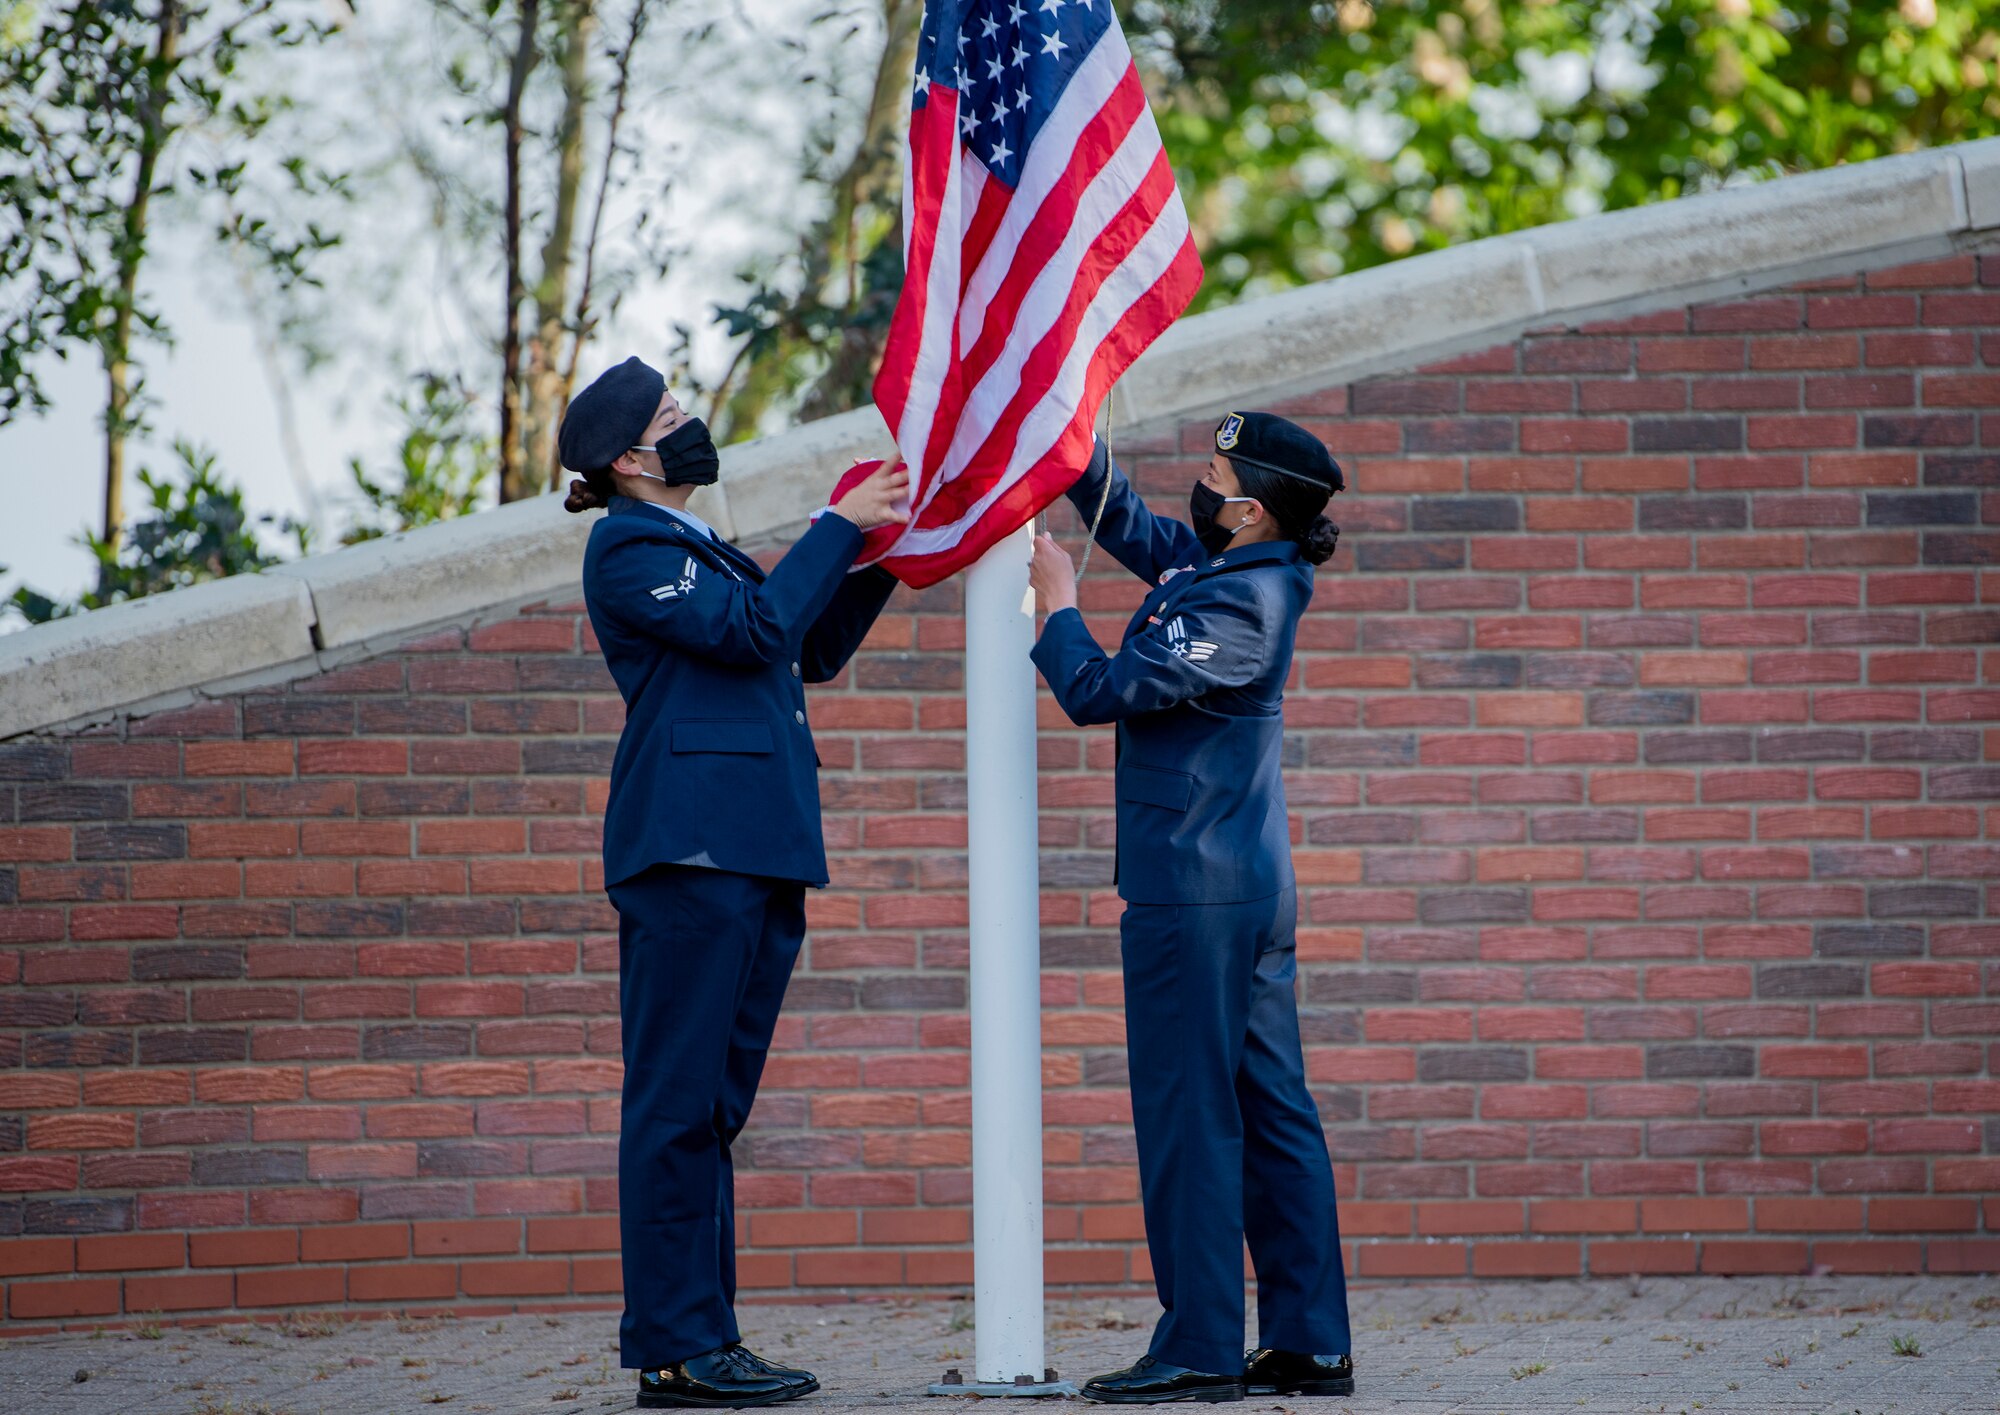 Airman 1st Class Gabbie Reyes,  left, and Senior Airman Maria Stevens, both 100th Security Forces Squadron, hoist the U.S. flag during the opening ceremony to commemorate the start of National Police Week at RAF Lakenheath, England, May 11, 2020. National Police Week is an observance in the United States which pays tribute to local, state and federal officers who’ve died or who’ve been disabled in the line of duty. (U.S. Air Force photo by Airman 1st Class Jessi Monte)